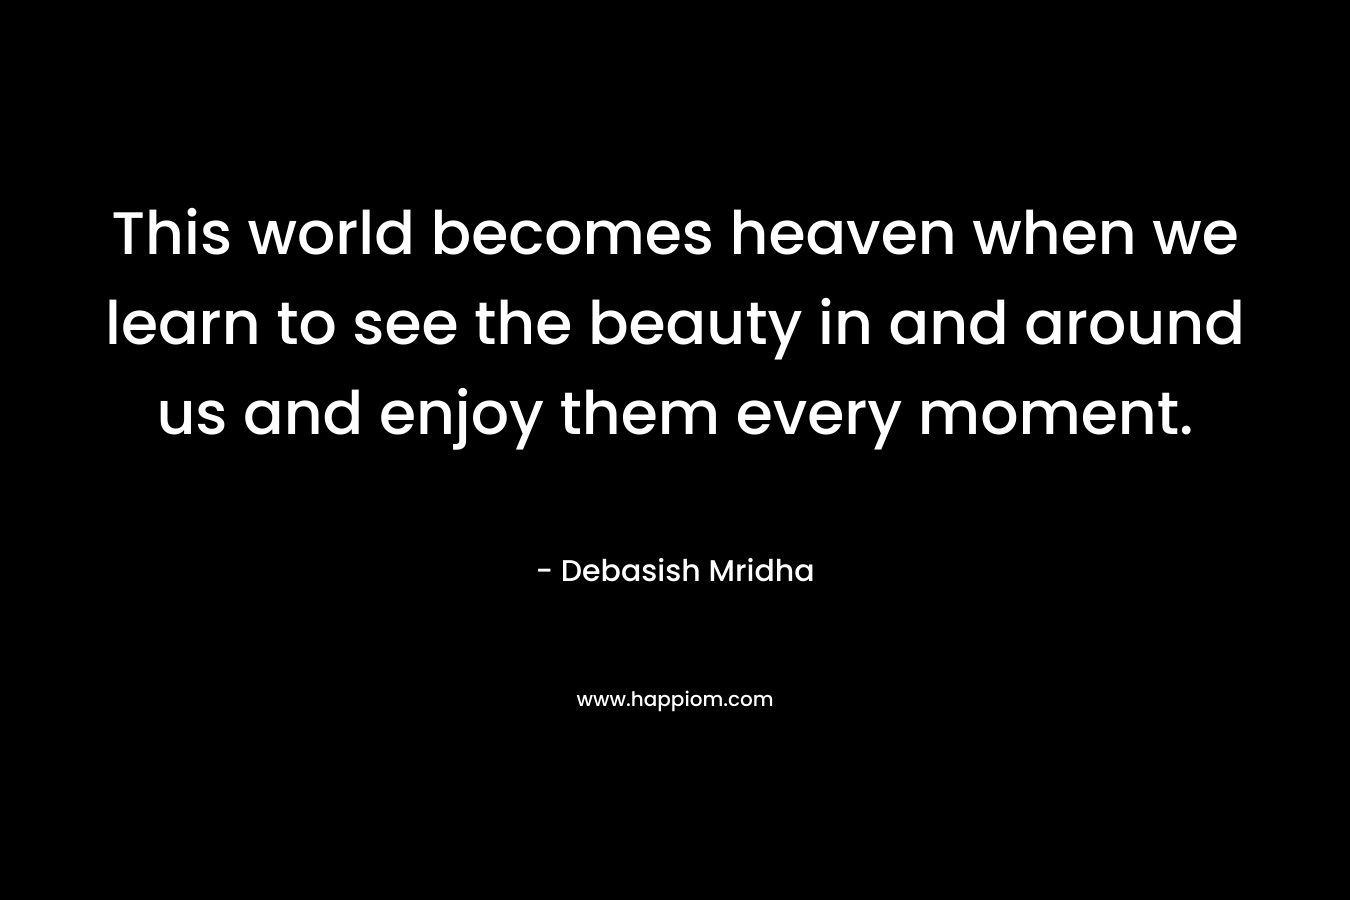 This world becomes heaven when we learn to see the beauty in and around us and enjoy them every moment.